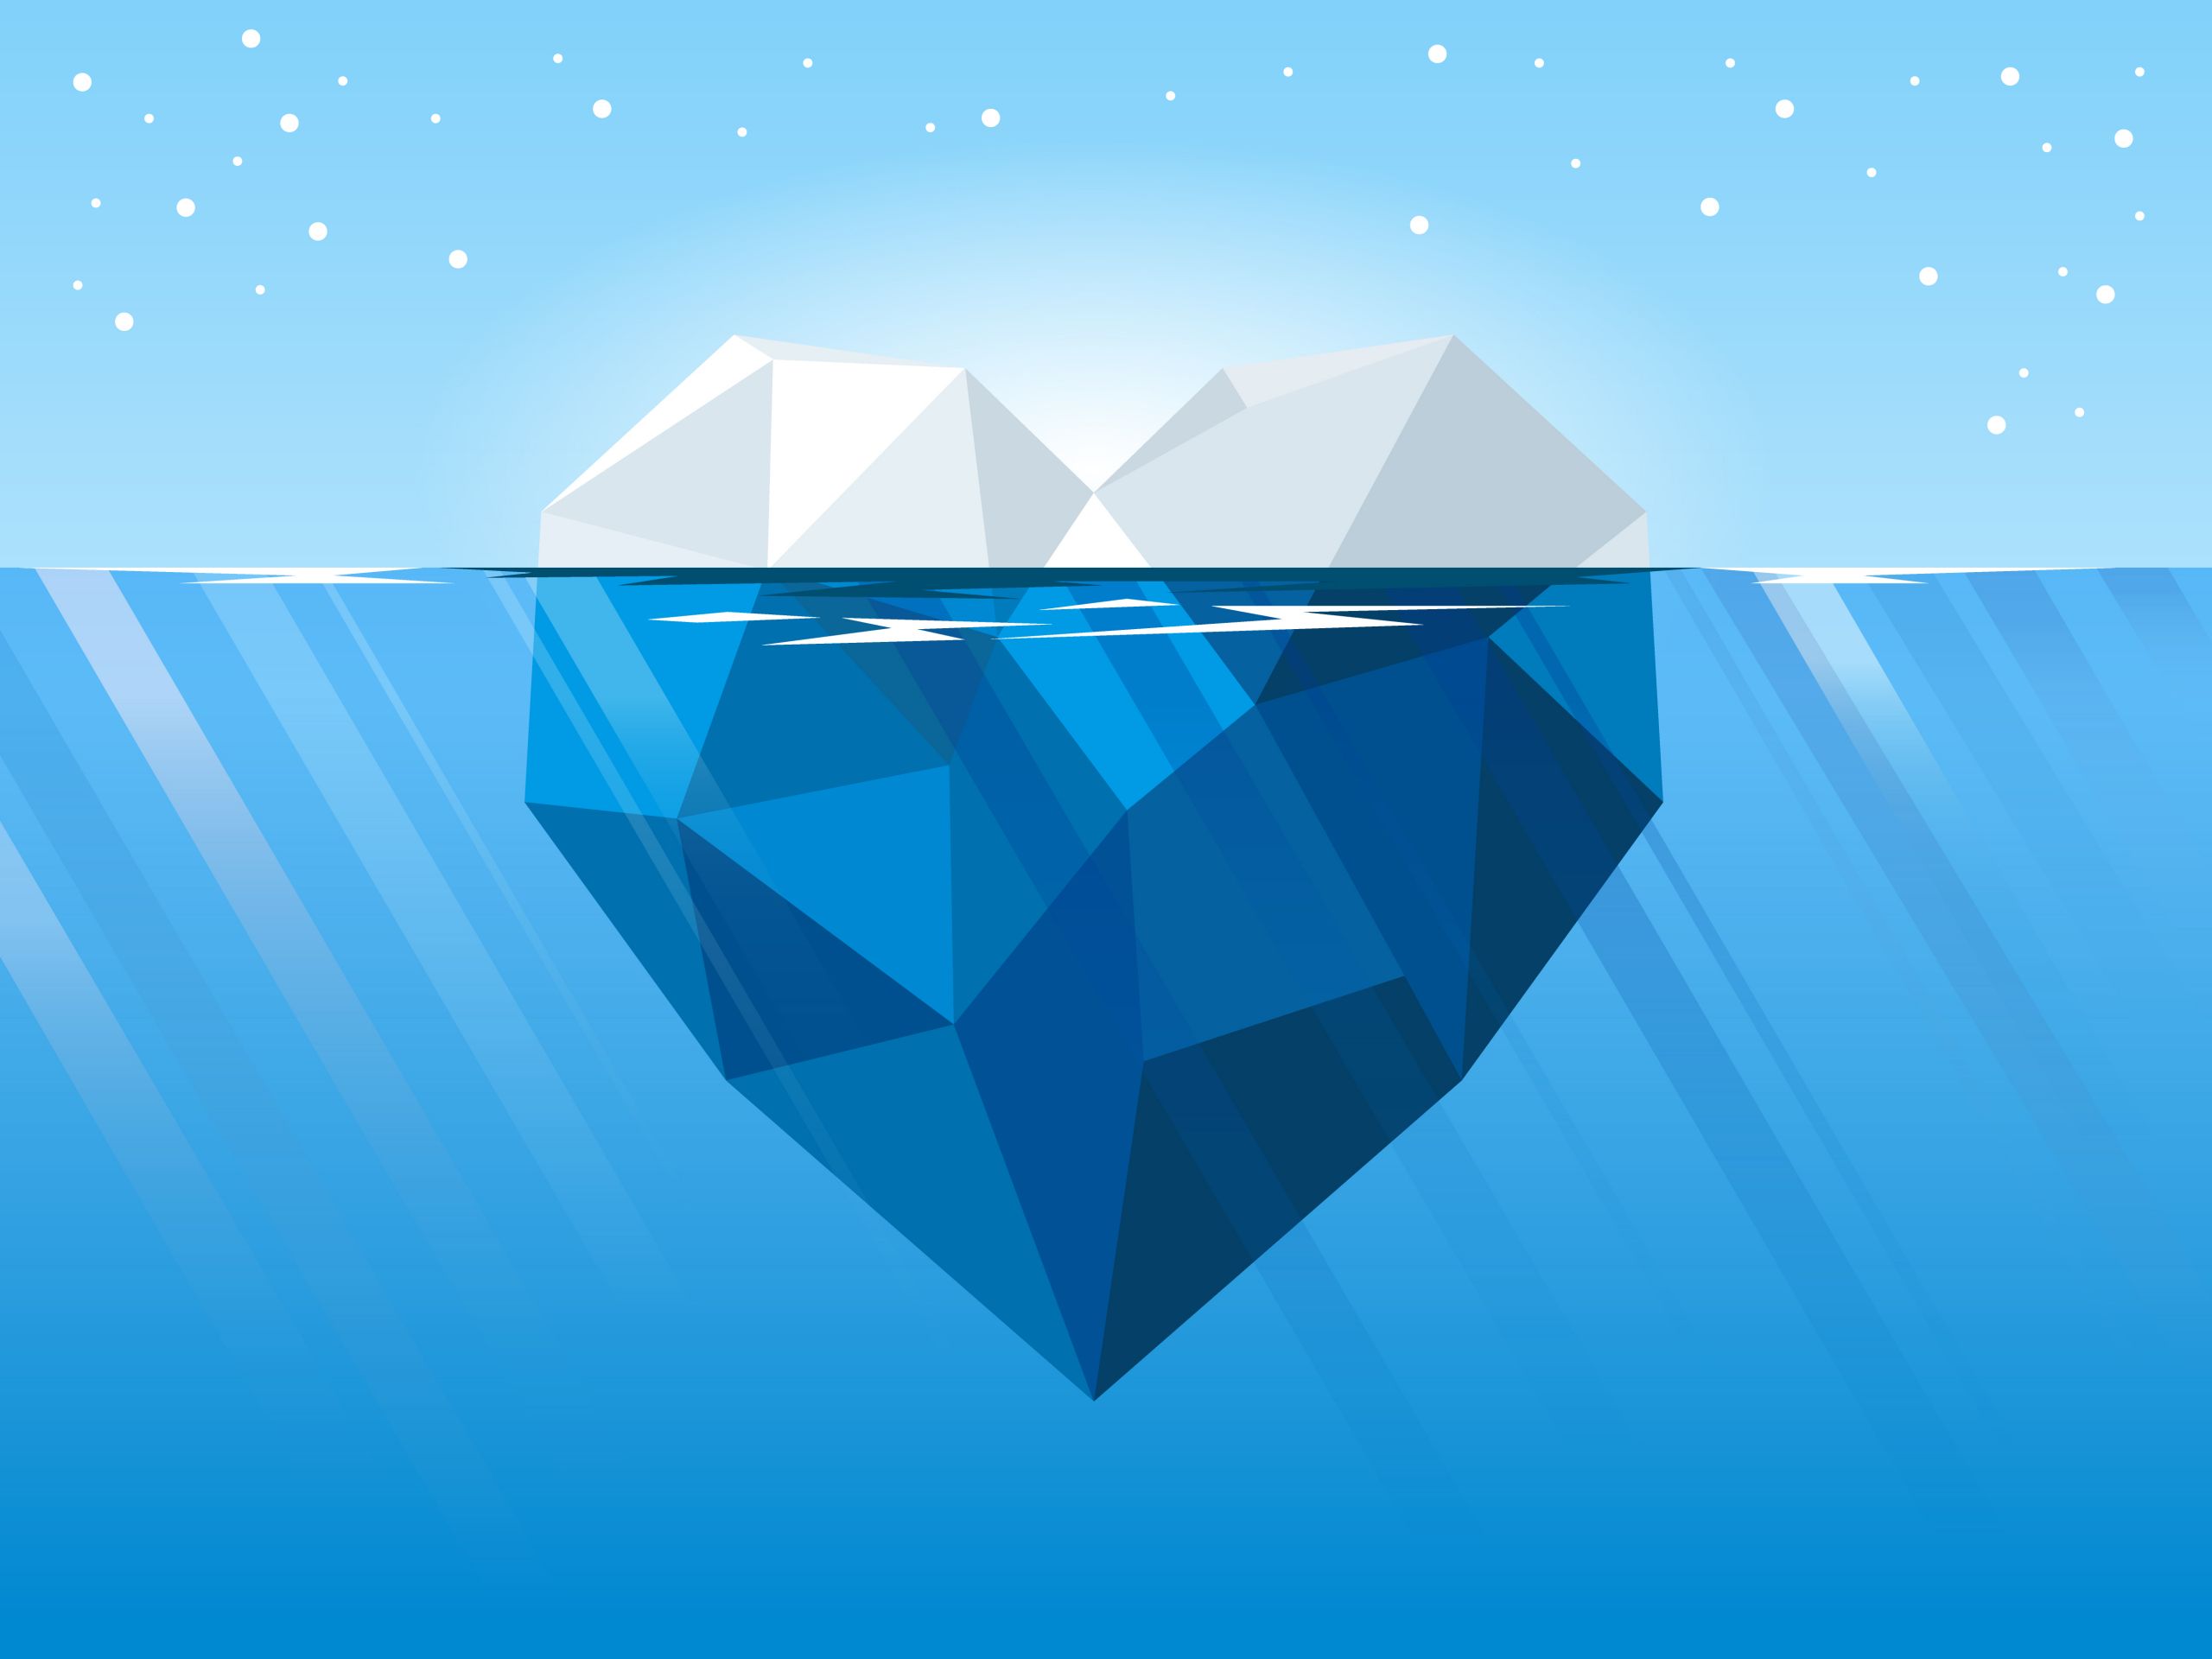 Iceberg,In,The,Heart,Shape,Floating,In,The,Deep,Blue